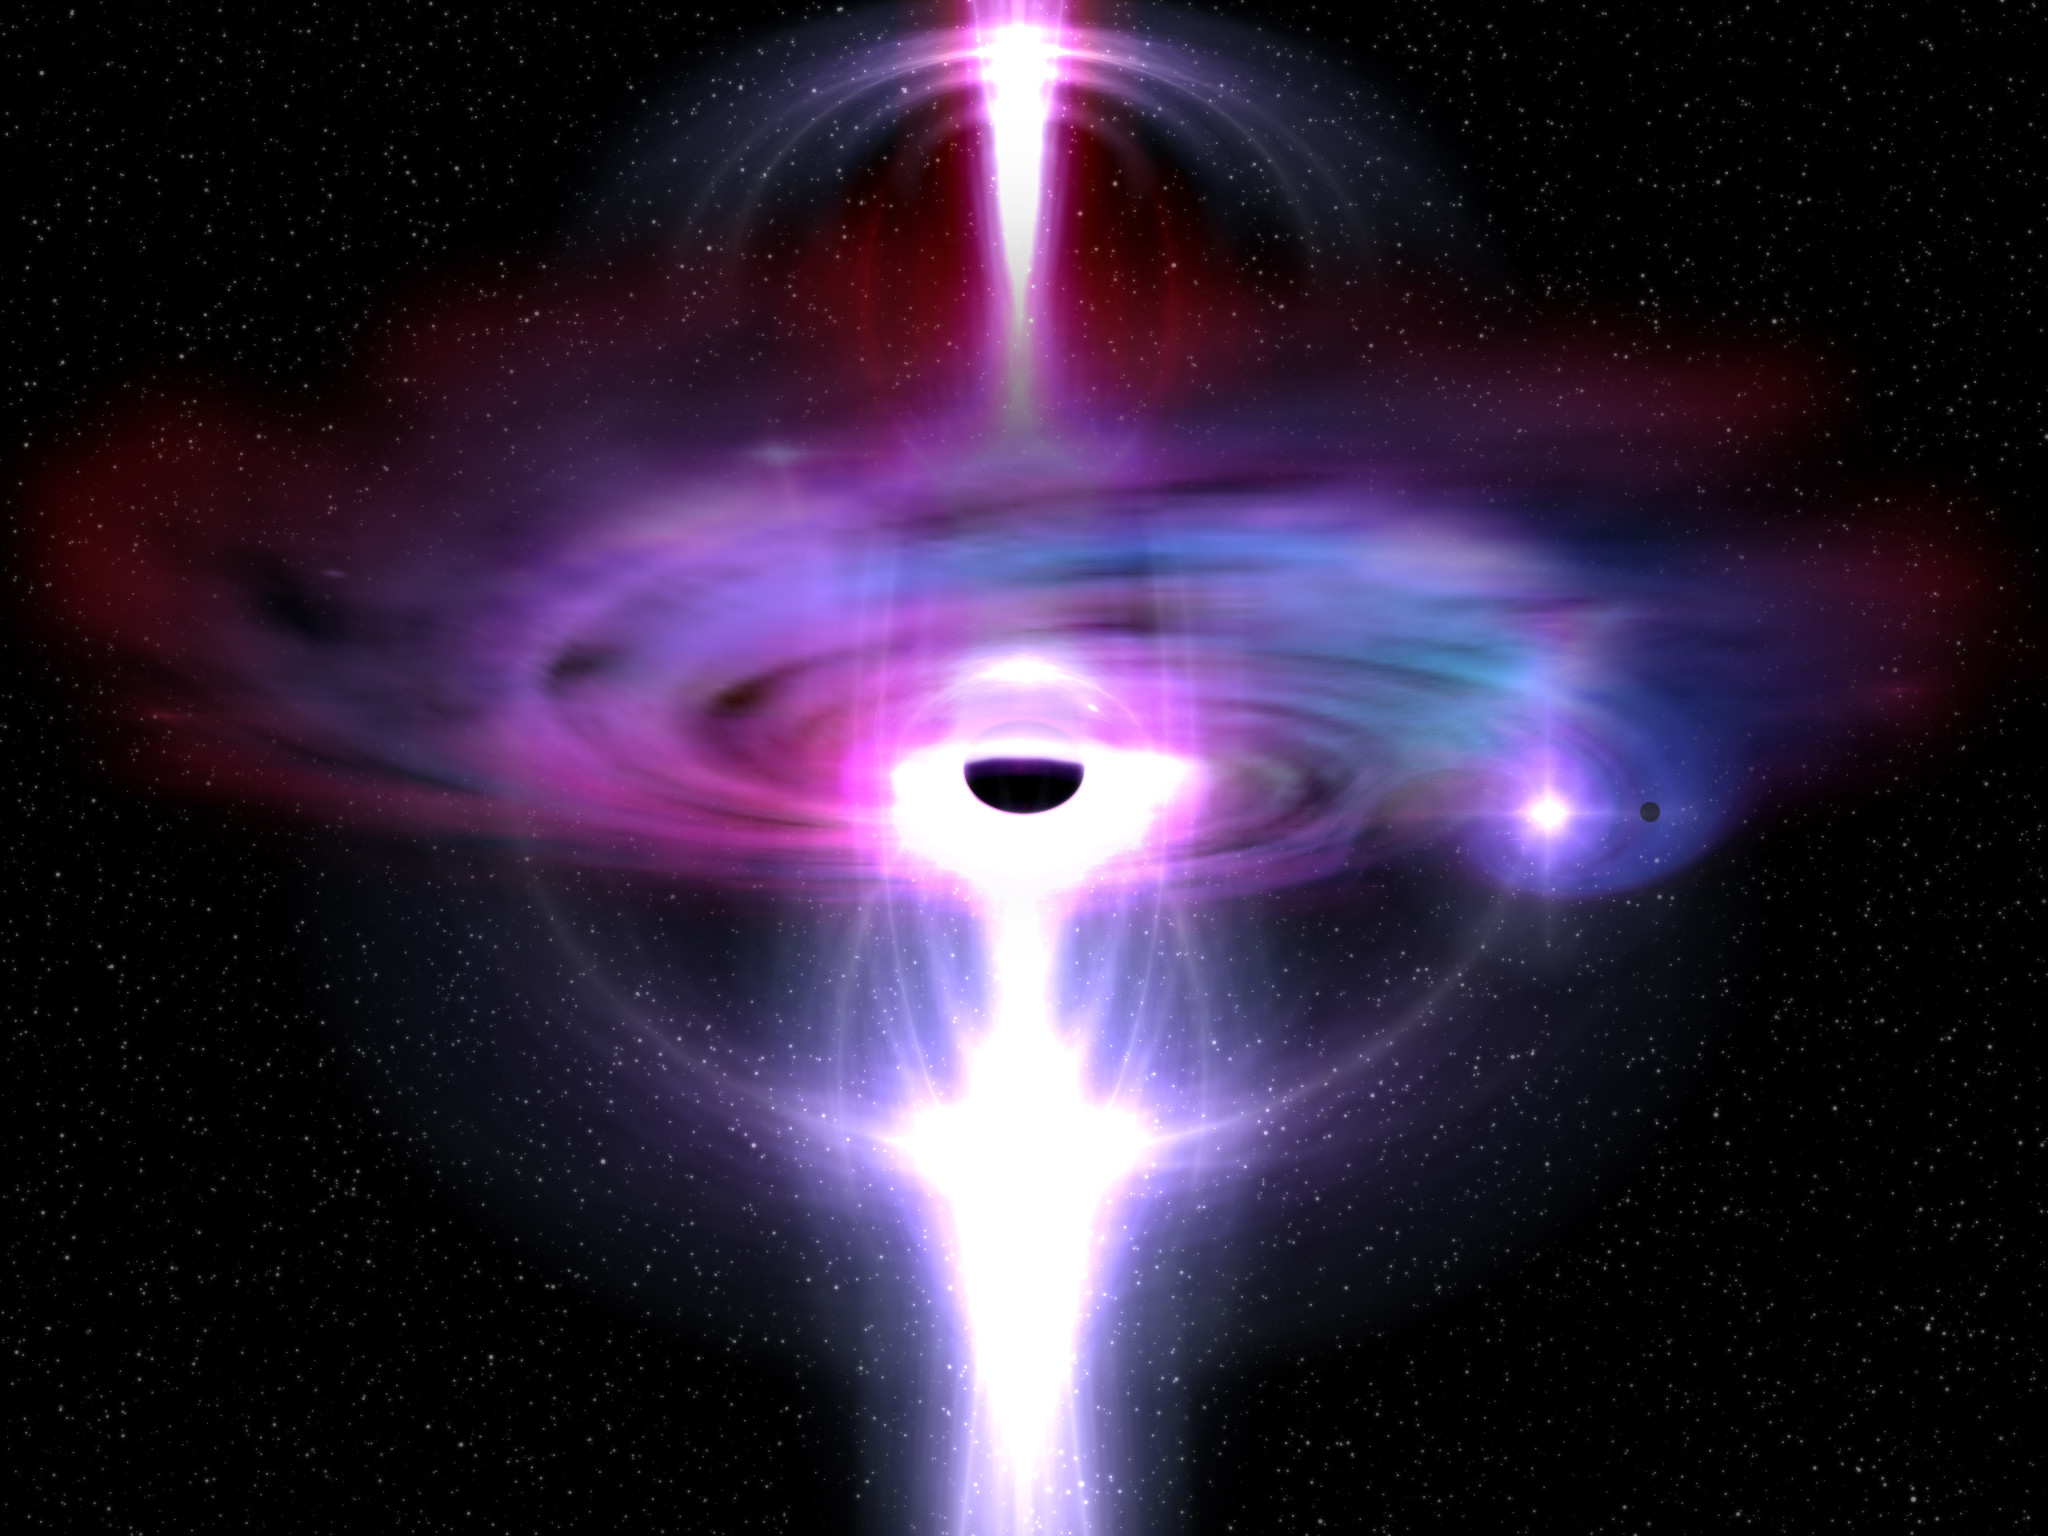 2048x1536 Wow most beautiful Black Hole i have seen :D |  The_Black_Hole_by_StarSeekervds.jpg